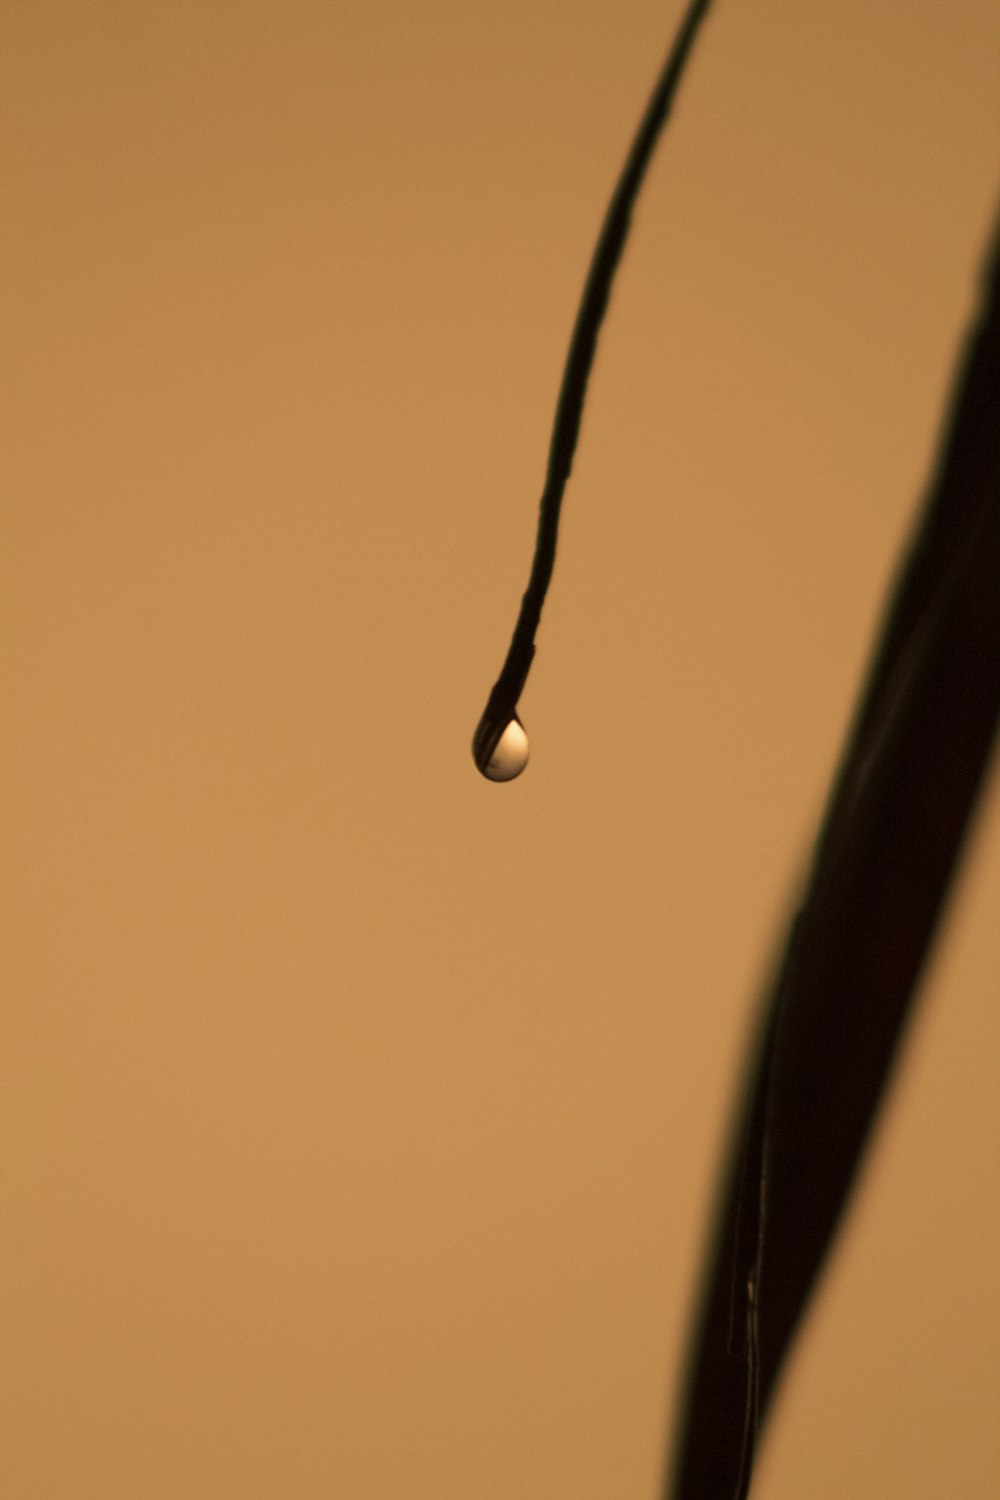 water dew on black coated wire